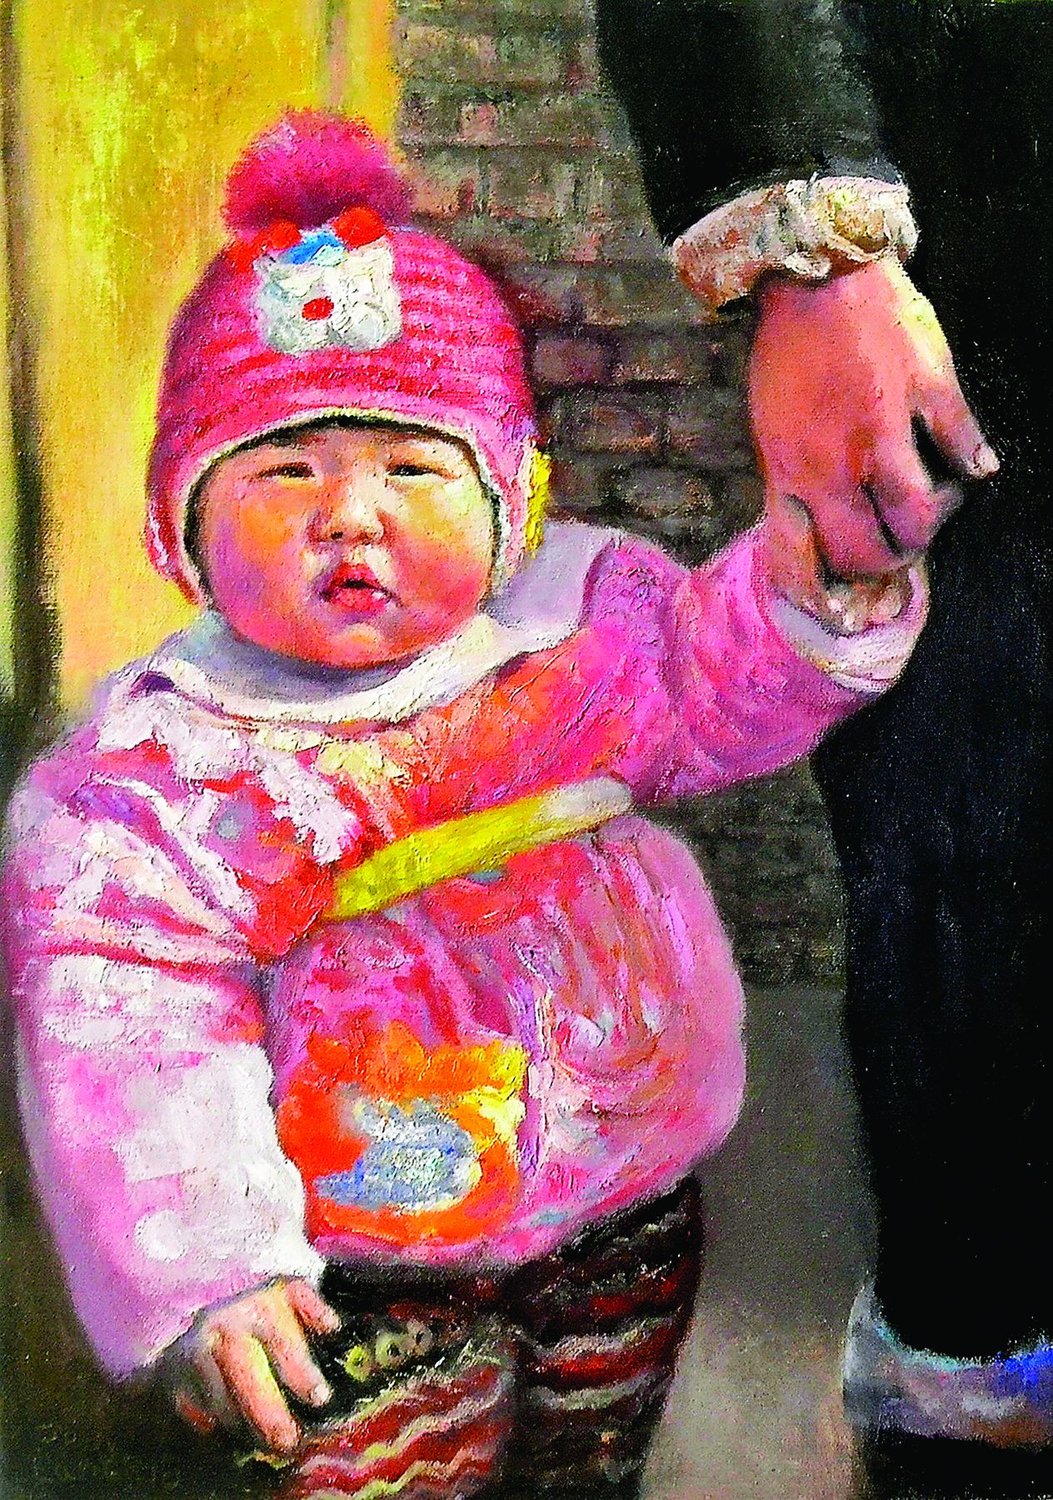 “Chinese Baby From Woyang Village” is by Joshua Lance.